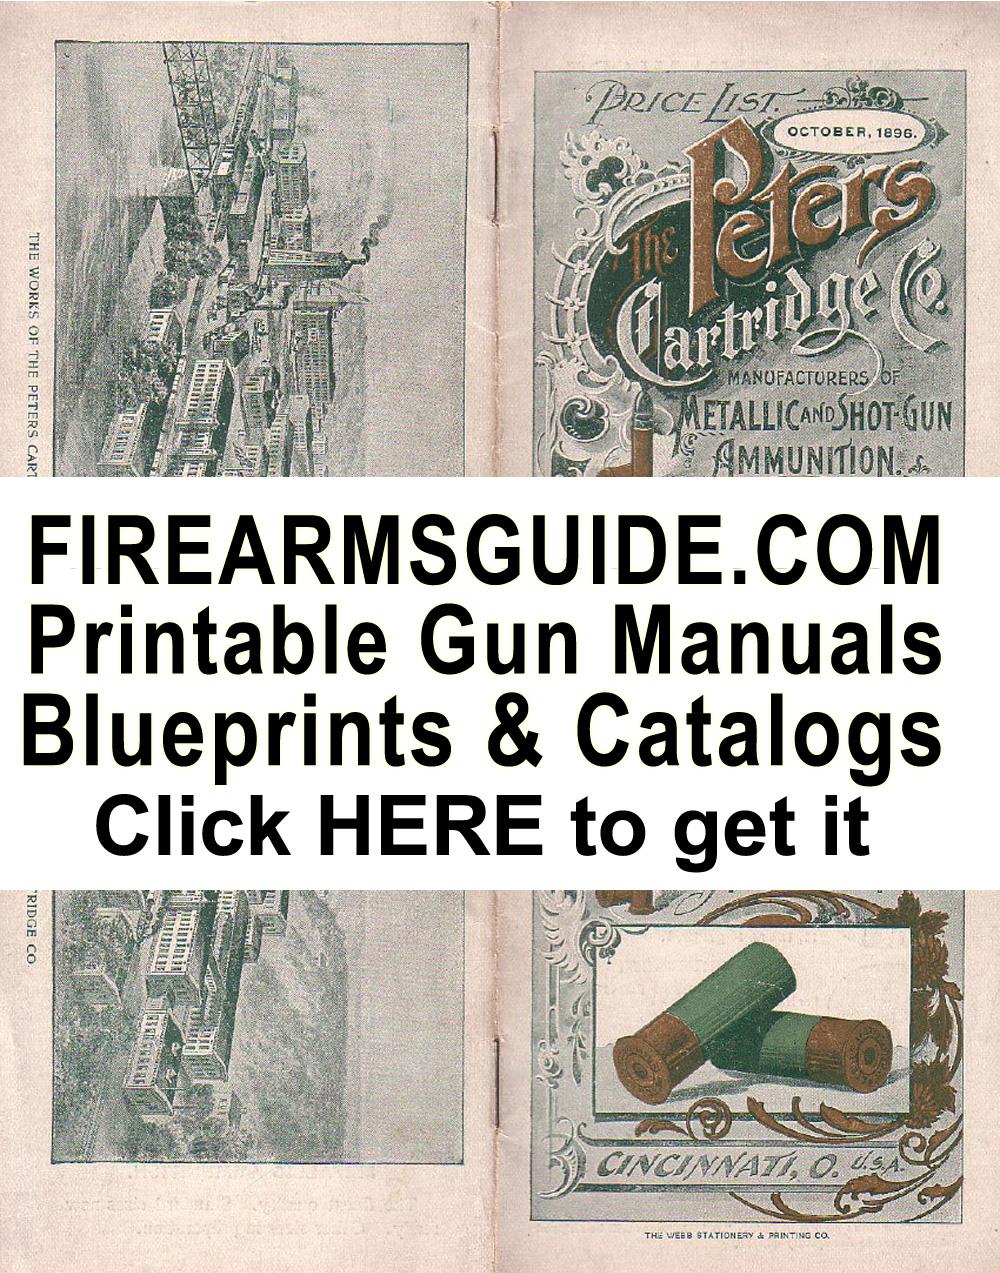 London, England Arms and Ammunition Manufacturing Company Shooting Guide 1904 